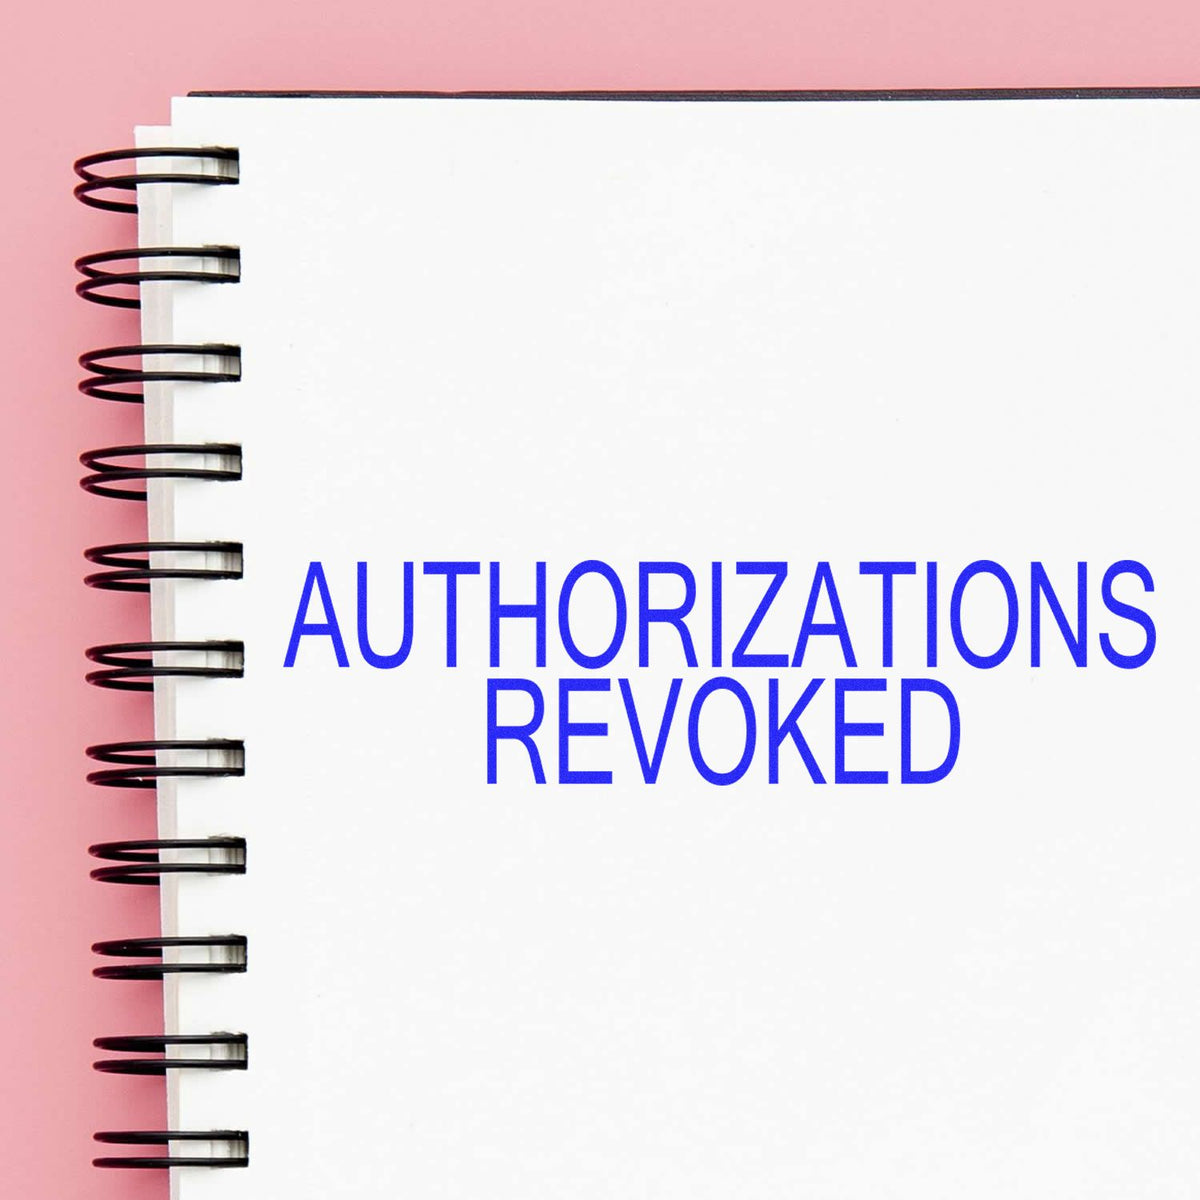 Self-Inking Authorizations Revoked Stamp In Use Photo